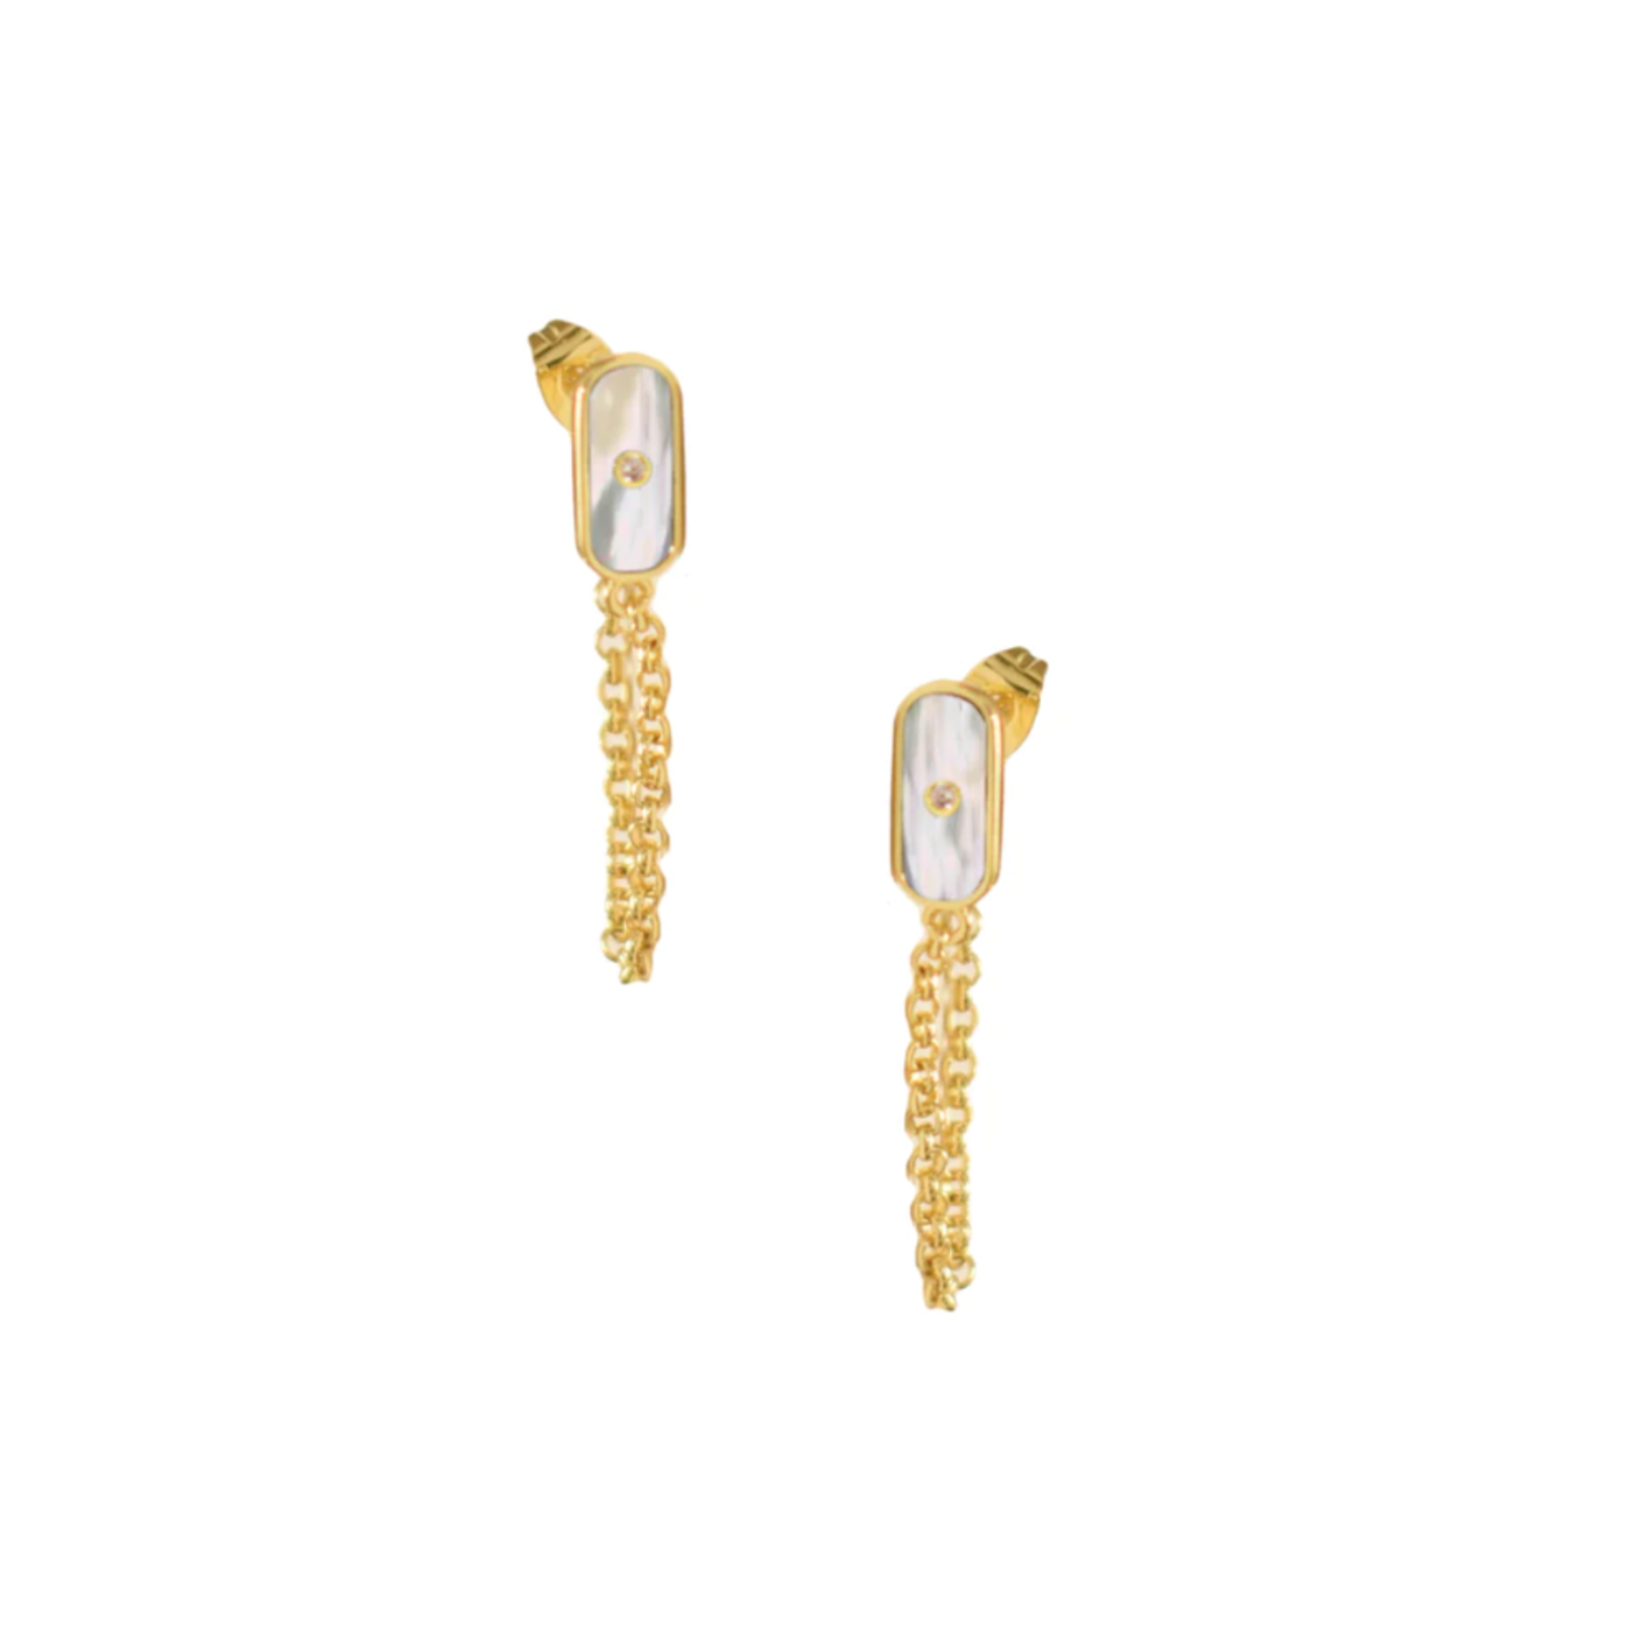 Adriana Pappas Chained Tablet Studs - Mother of Pearl